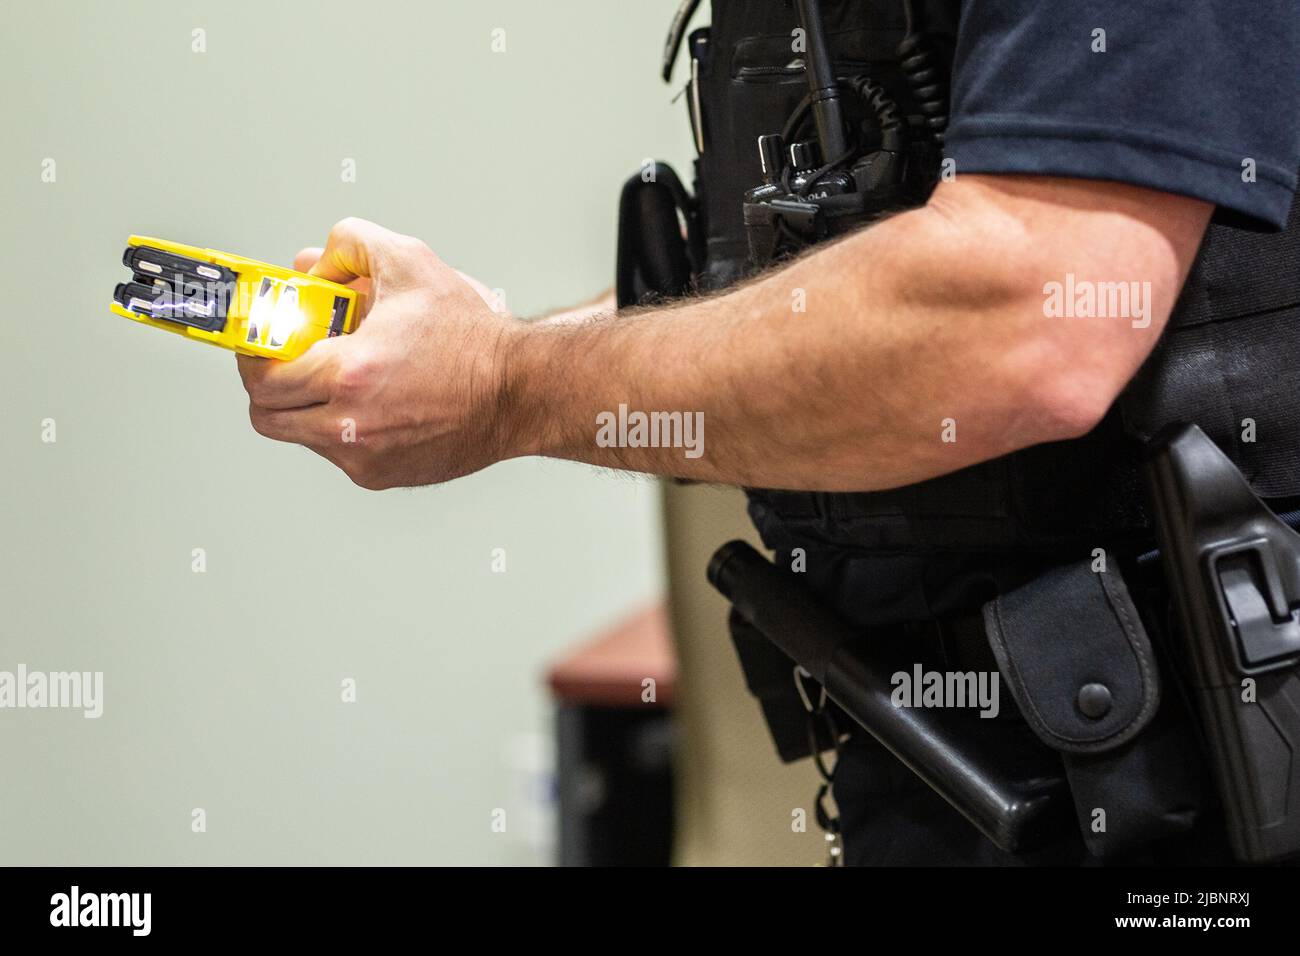 A taser gun in the hand of a police officer, Close up Stock Photo